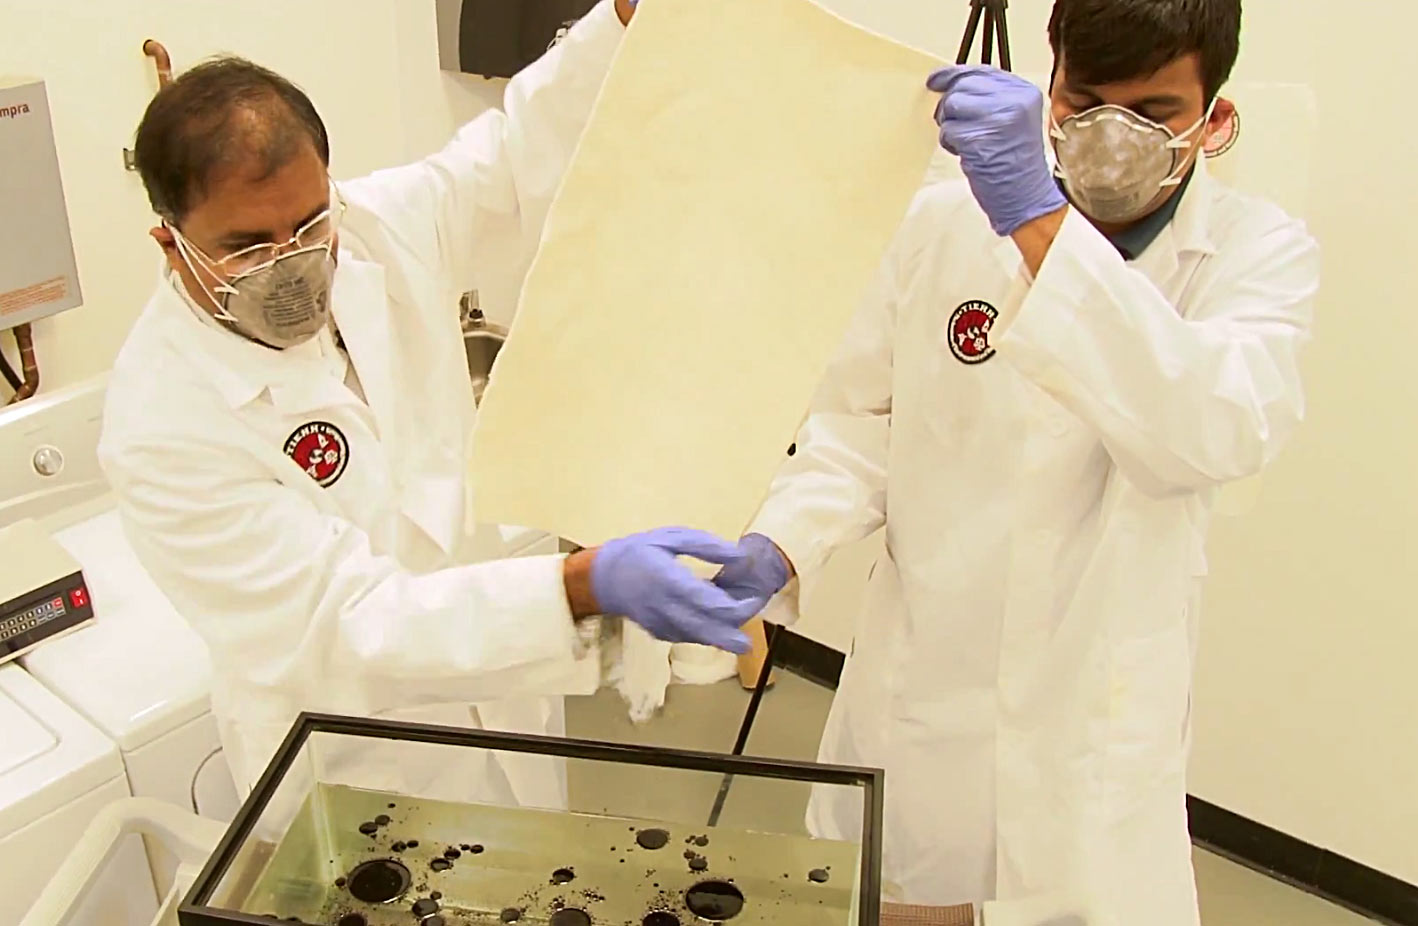 Collaborative research shows finer raw cotton best for oil spill remediation. Image: Texas Tech University.